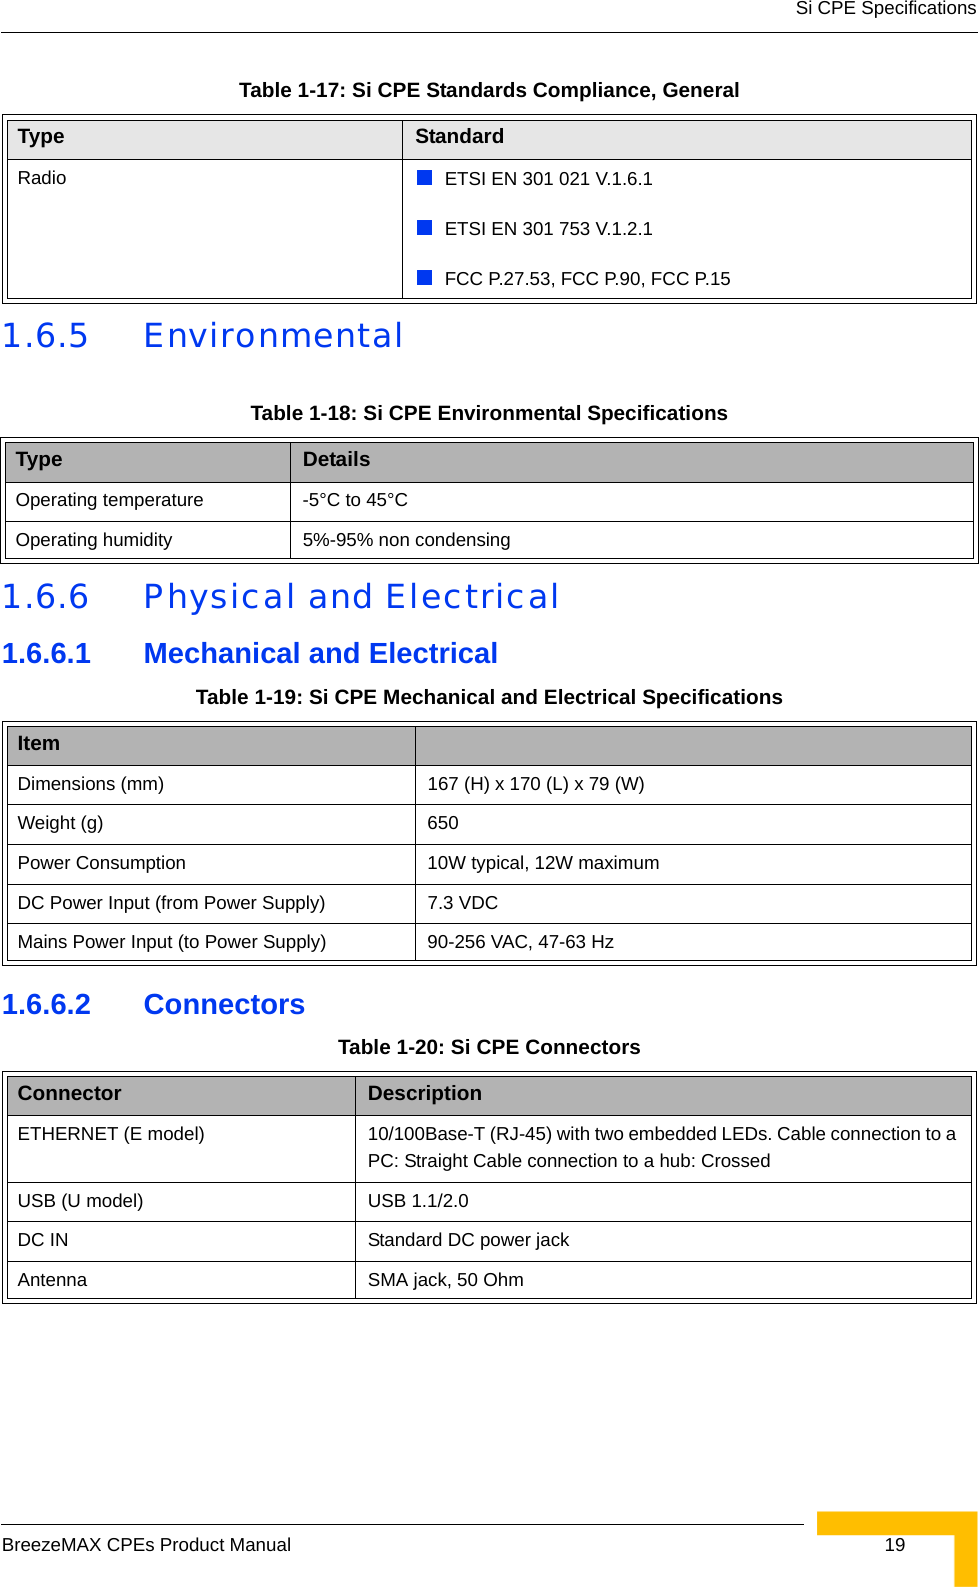 Si CPE SpecificationsBreezeMAX CPEs Product Manual  191.6.5 Environmental1.6.6 Physical and Electrical 1.6.6.1 Mechanical and Electrical1.6.6.2 ConnectorsRadio ETSI EN 301 021 V.1.6.1ETSI EN 301 753 V.1.2.1FCC P.27.53, FCC P.90, FCC P.15Table 1-18: Si CPE Environmental SpecificationsType DetailsOperating temperature -5°C to 45°COperating humidity 5%-95% non condensingTable 1-19: Si CPE Mechanical and Electrical SpecificationsItemDimensions (mm) 167 (H) x 170 (L) x 79 (W)Weight (g) 650Power Consumption 10W typical, 12W maximumDC Power Input (from Power Supply) 7.3 VDCMains Power Input (to Power Supply) 90-256 VAC, 47-63 HzTable 1-20: Si CPE ConnectorsConnector DescriptionETHERNET (E model) 10/100Base-T (RJ-45) with two embedded LEDs. Cable connection to a PC: Straight Cable connection to a hub: CrossedUSB (U model) USB 1.1/2.0DC IN Standard DC power jackAntenna SMA jack, 50 OhmTable 1-17: Si CPE Standards Compliance, GeneralType Standard